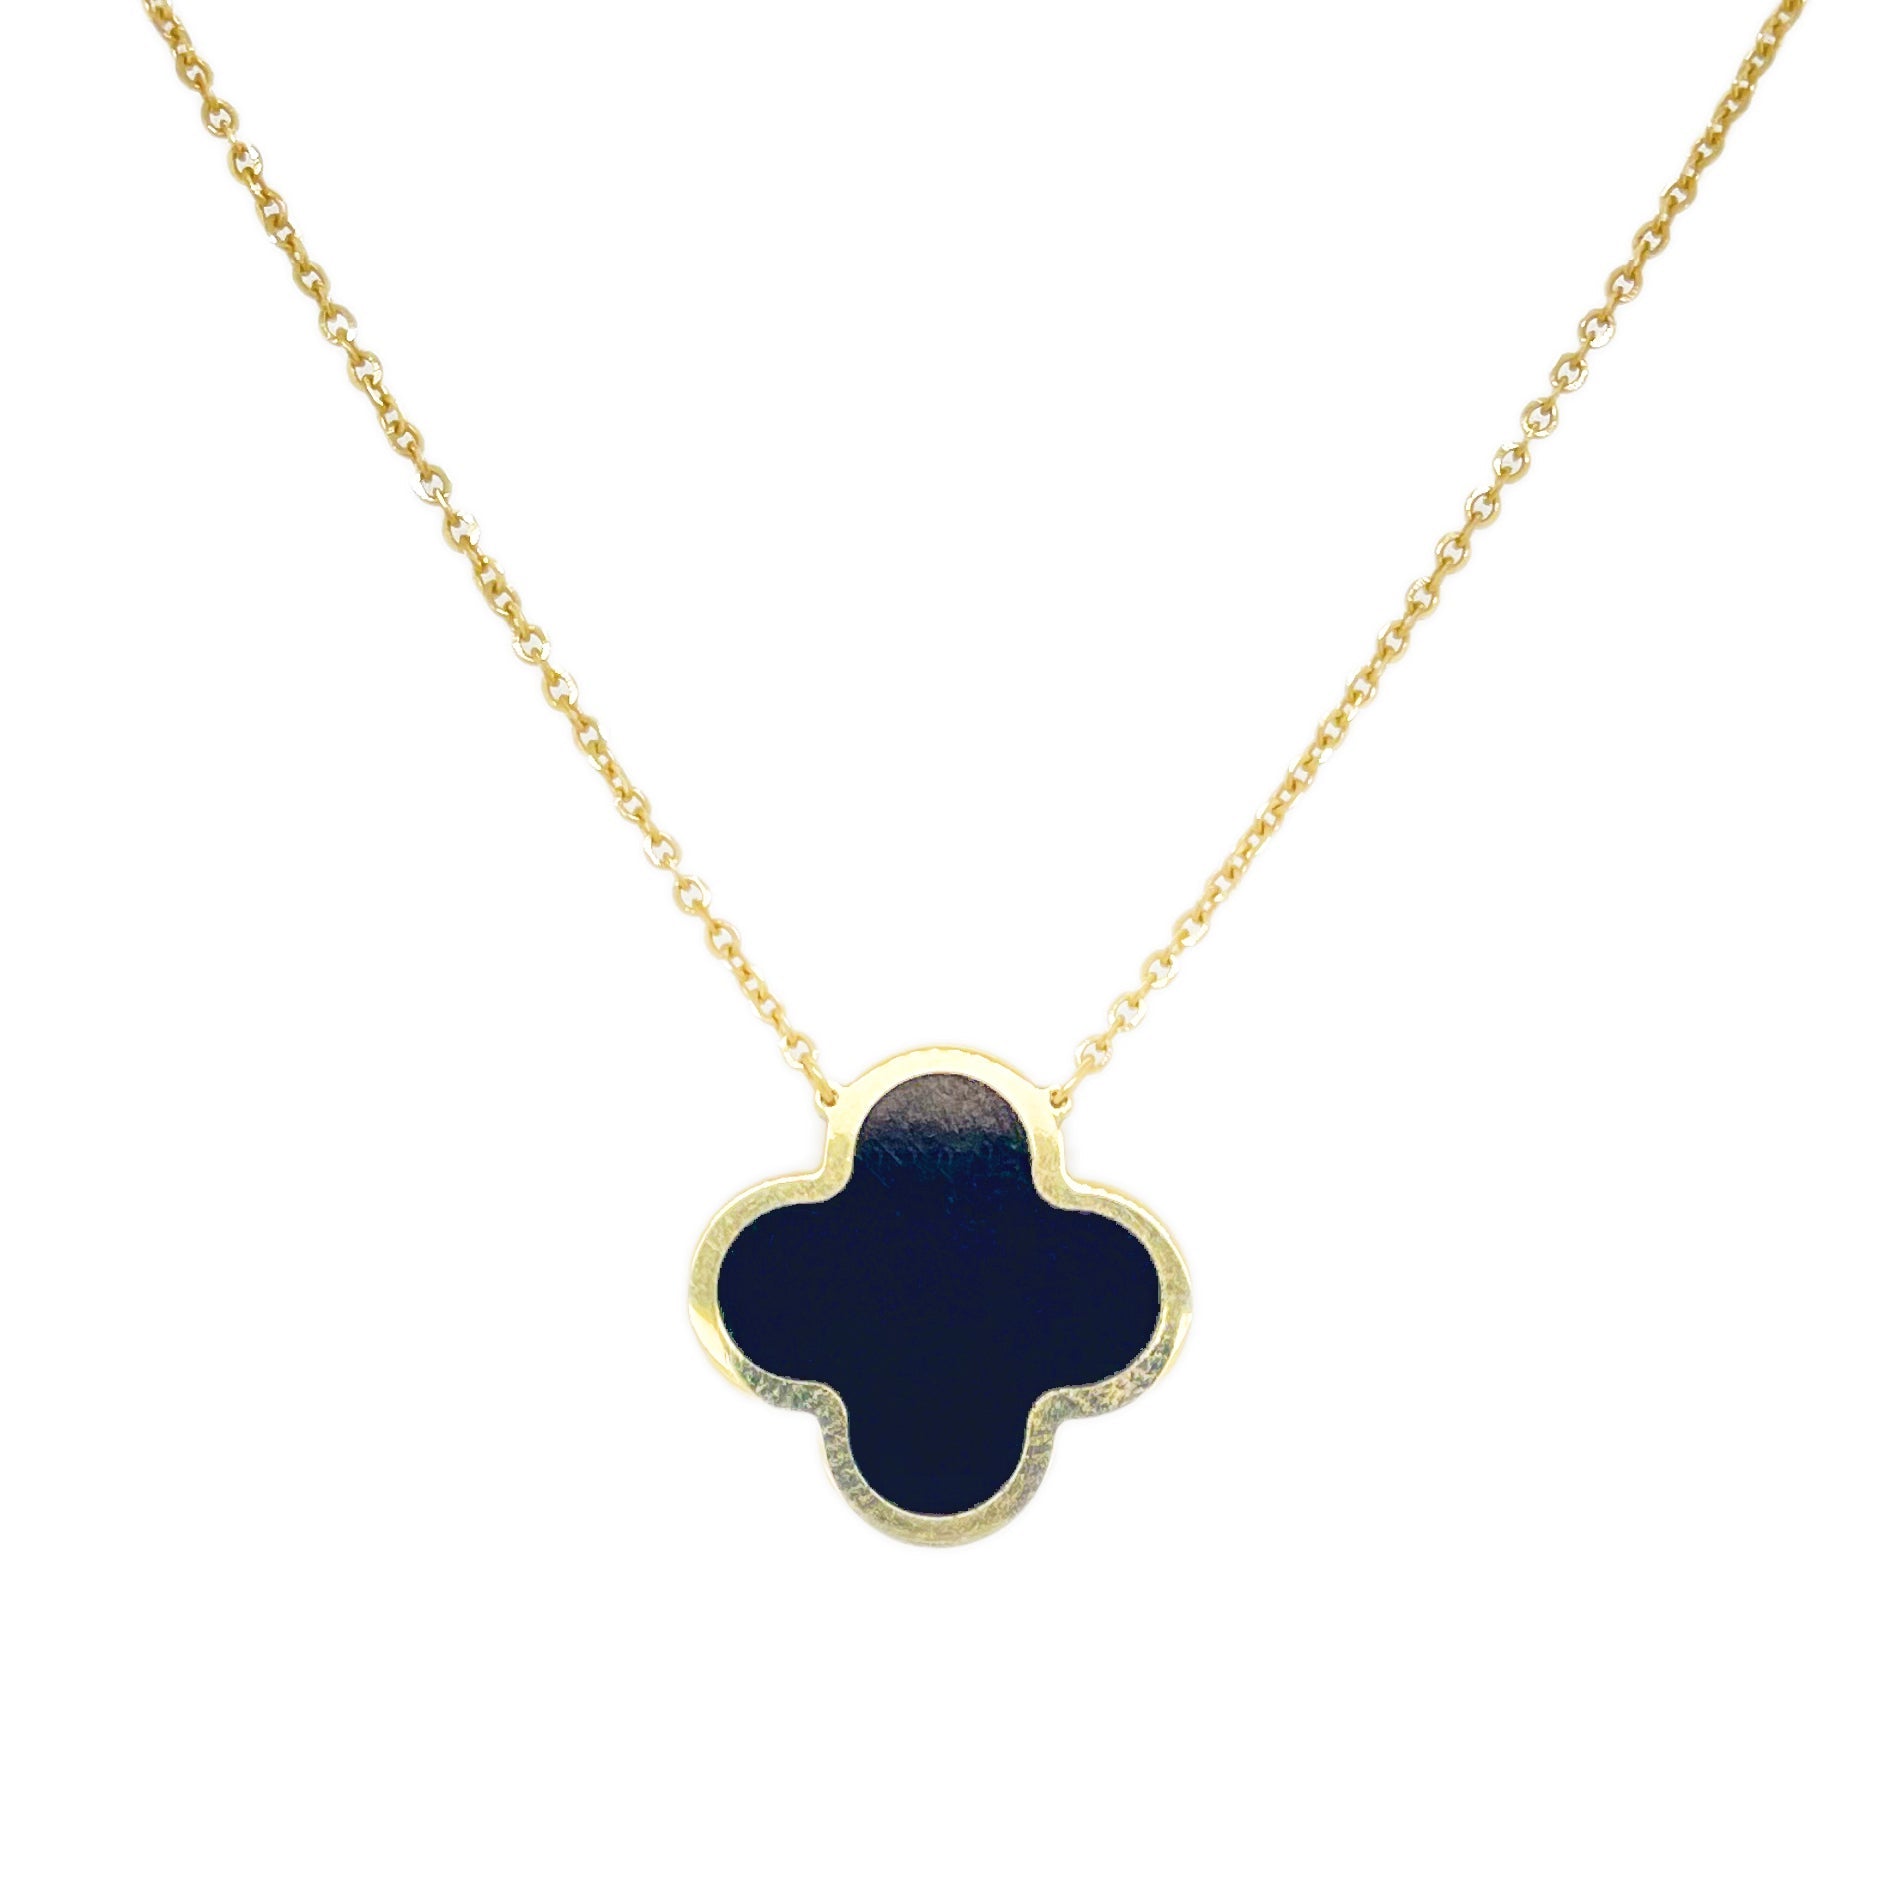 14K Yellow Gold & Onyx Clover Necklace